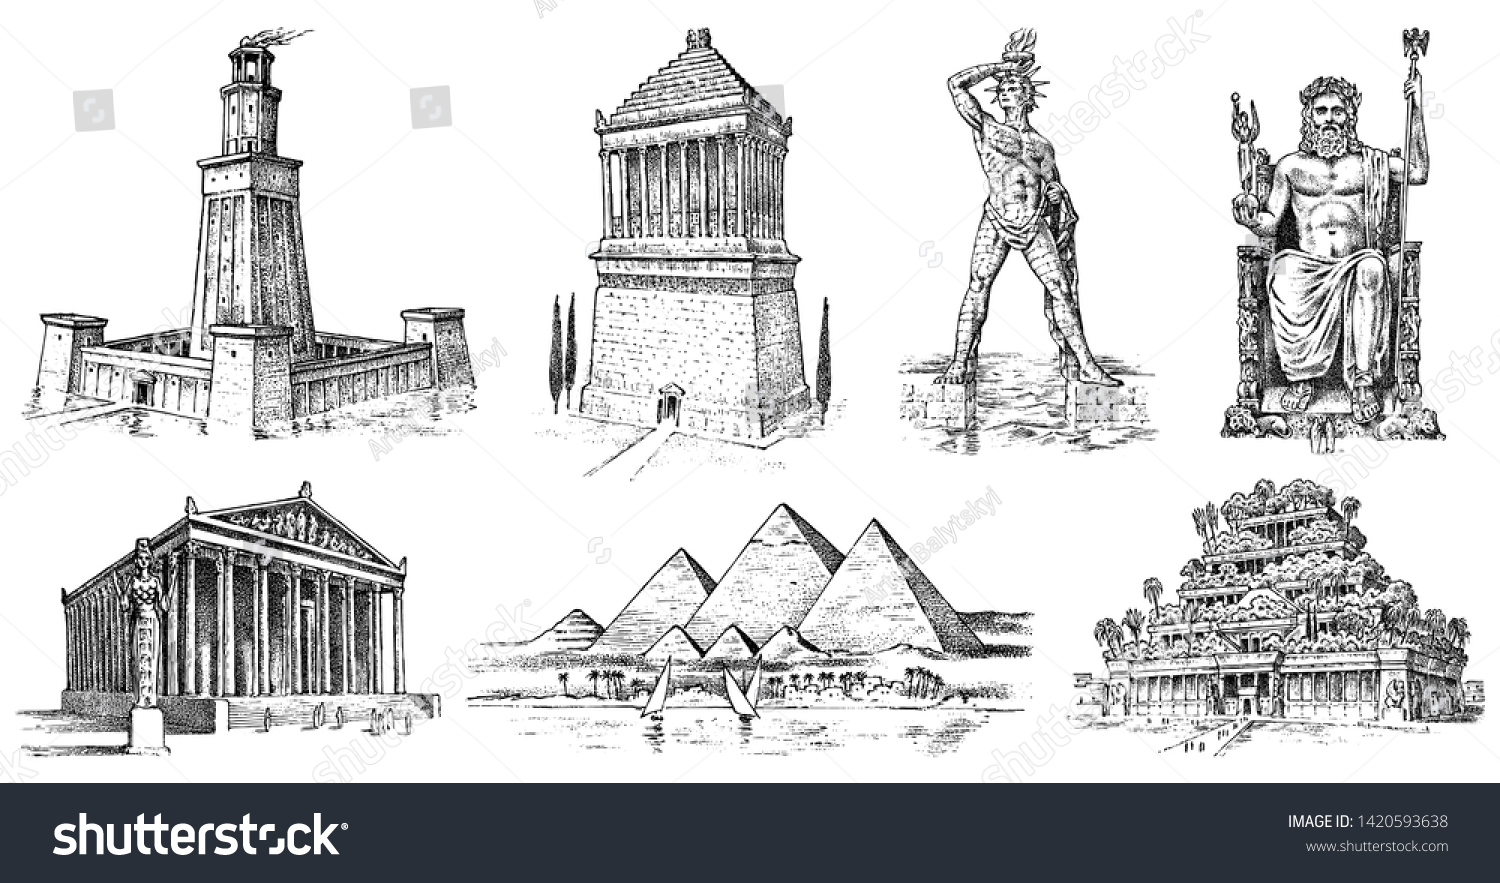 SVG of Seven Wonders of the Ancient World. Pyramid of Giza, Hanging Gardens of Babylon, Temple of Artemis at Ephesus, Zeus at Olympia, Mausoleum at Halicarnassus, Colossus of Rhodes, Lighthouse of Alexandria svg